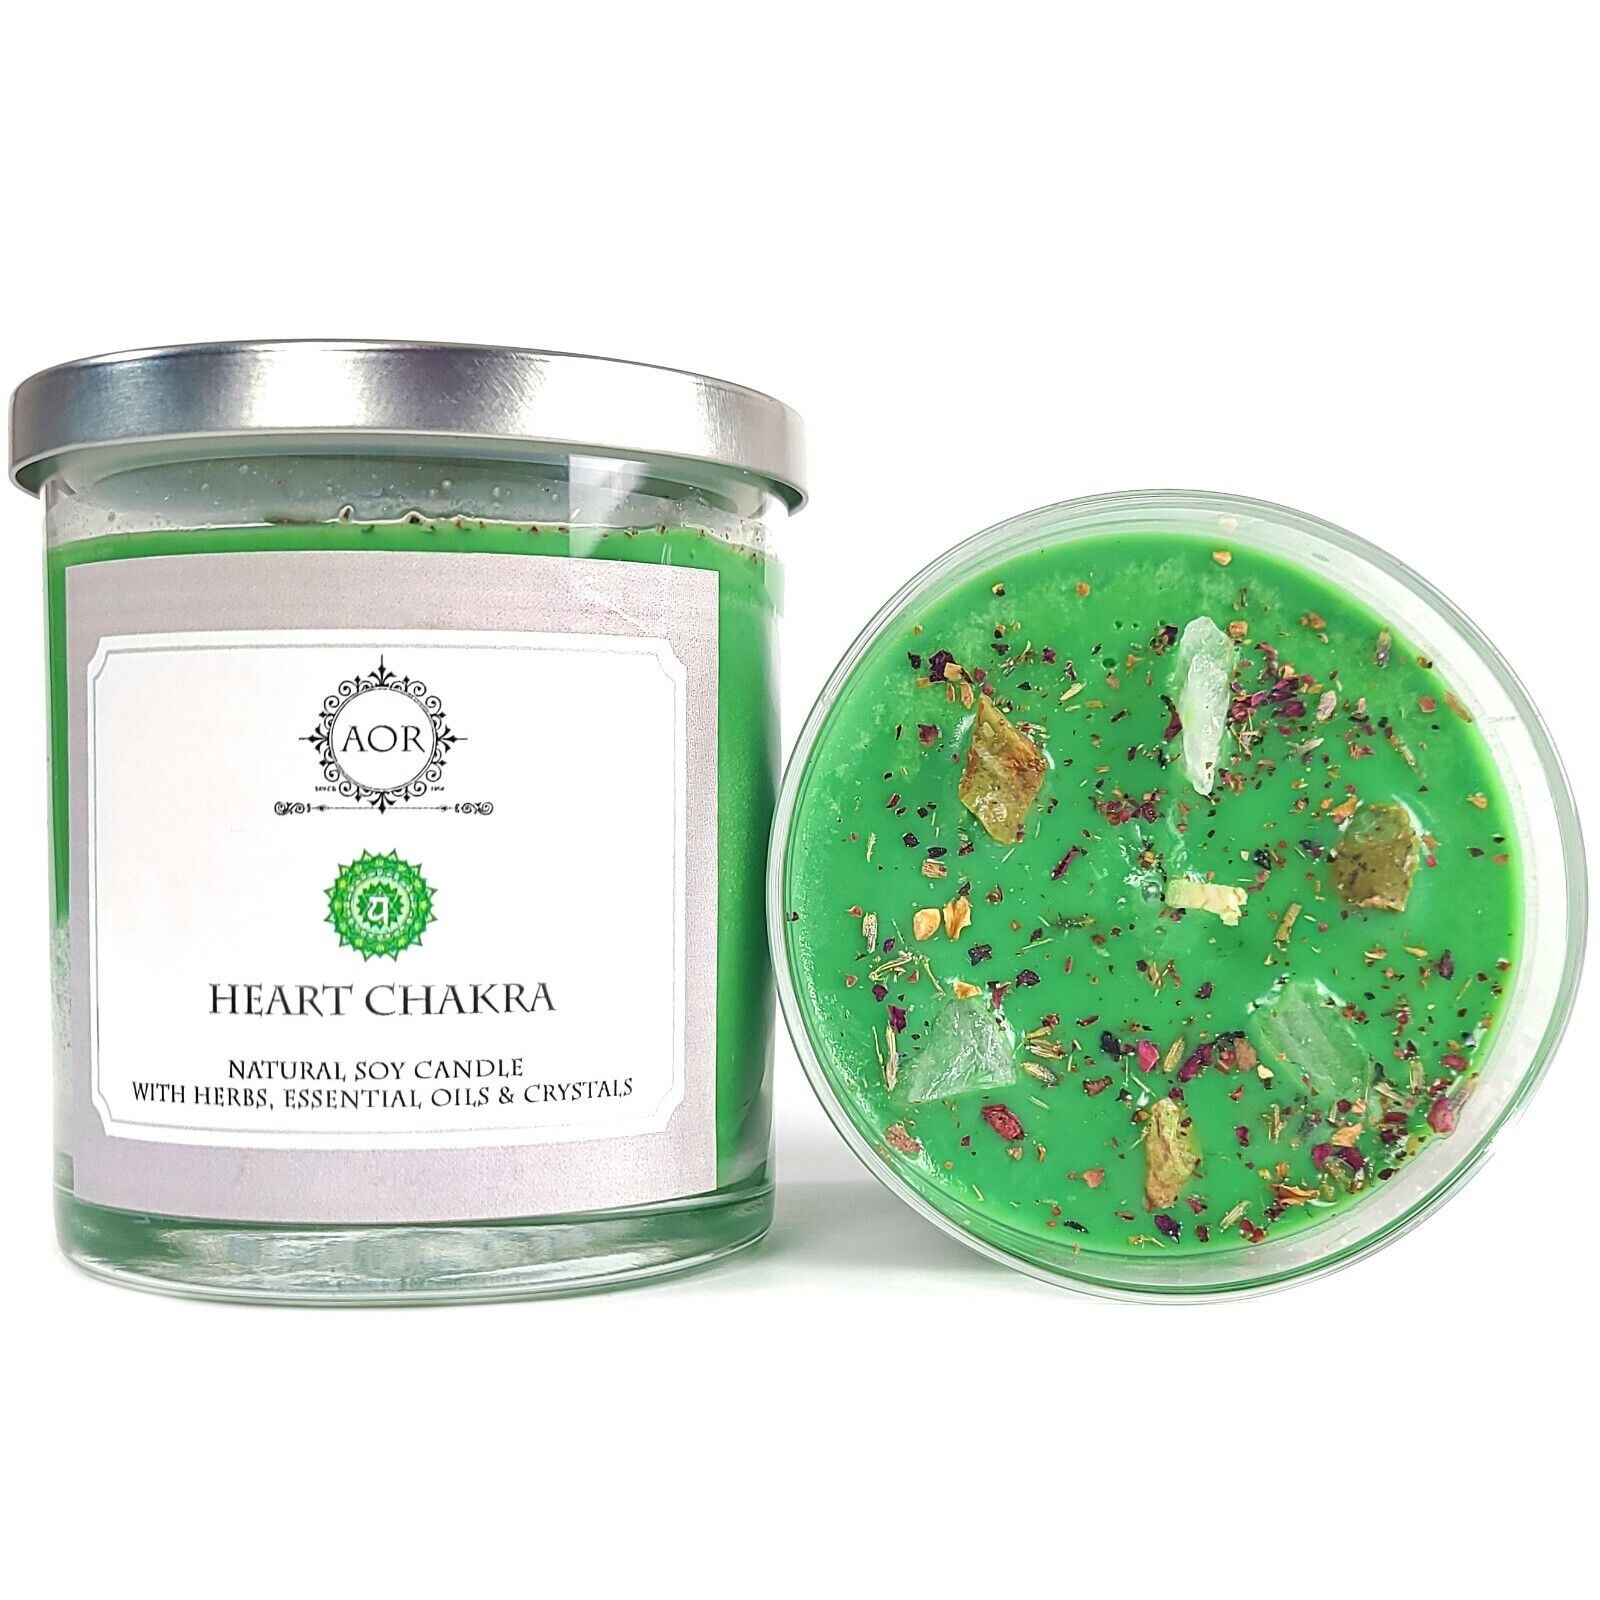 Heart Chakra Soy Candle w/ Crystals & Herbs Love Compassion Yoga Wiccan Pagan